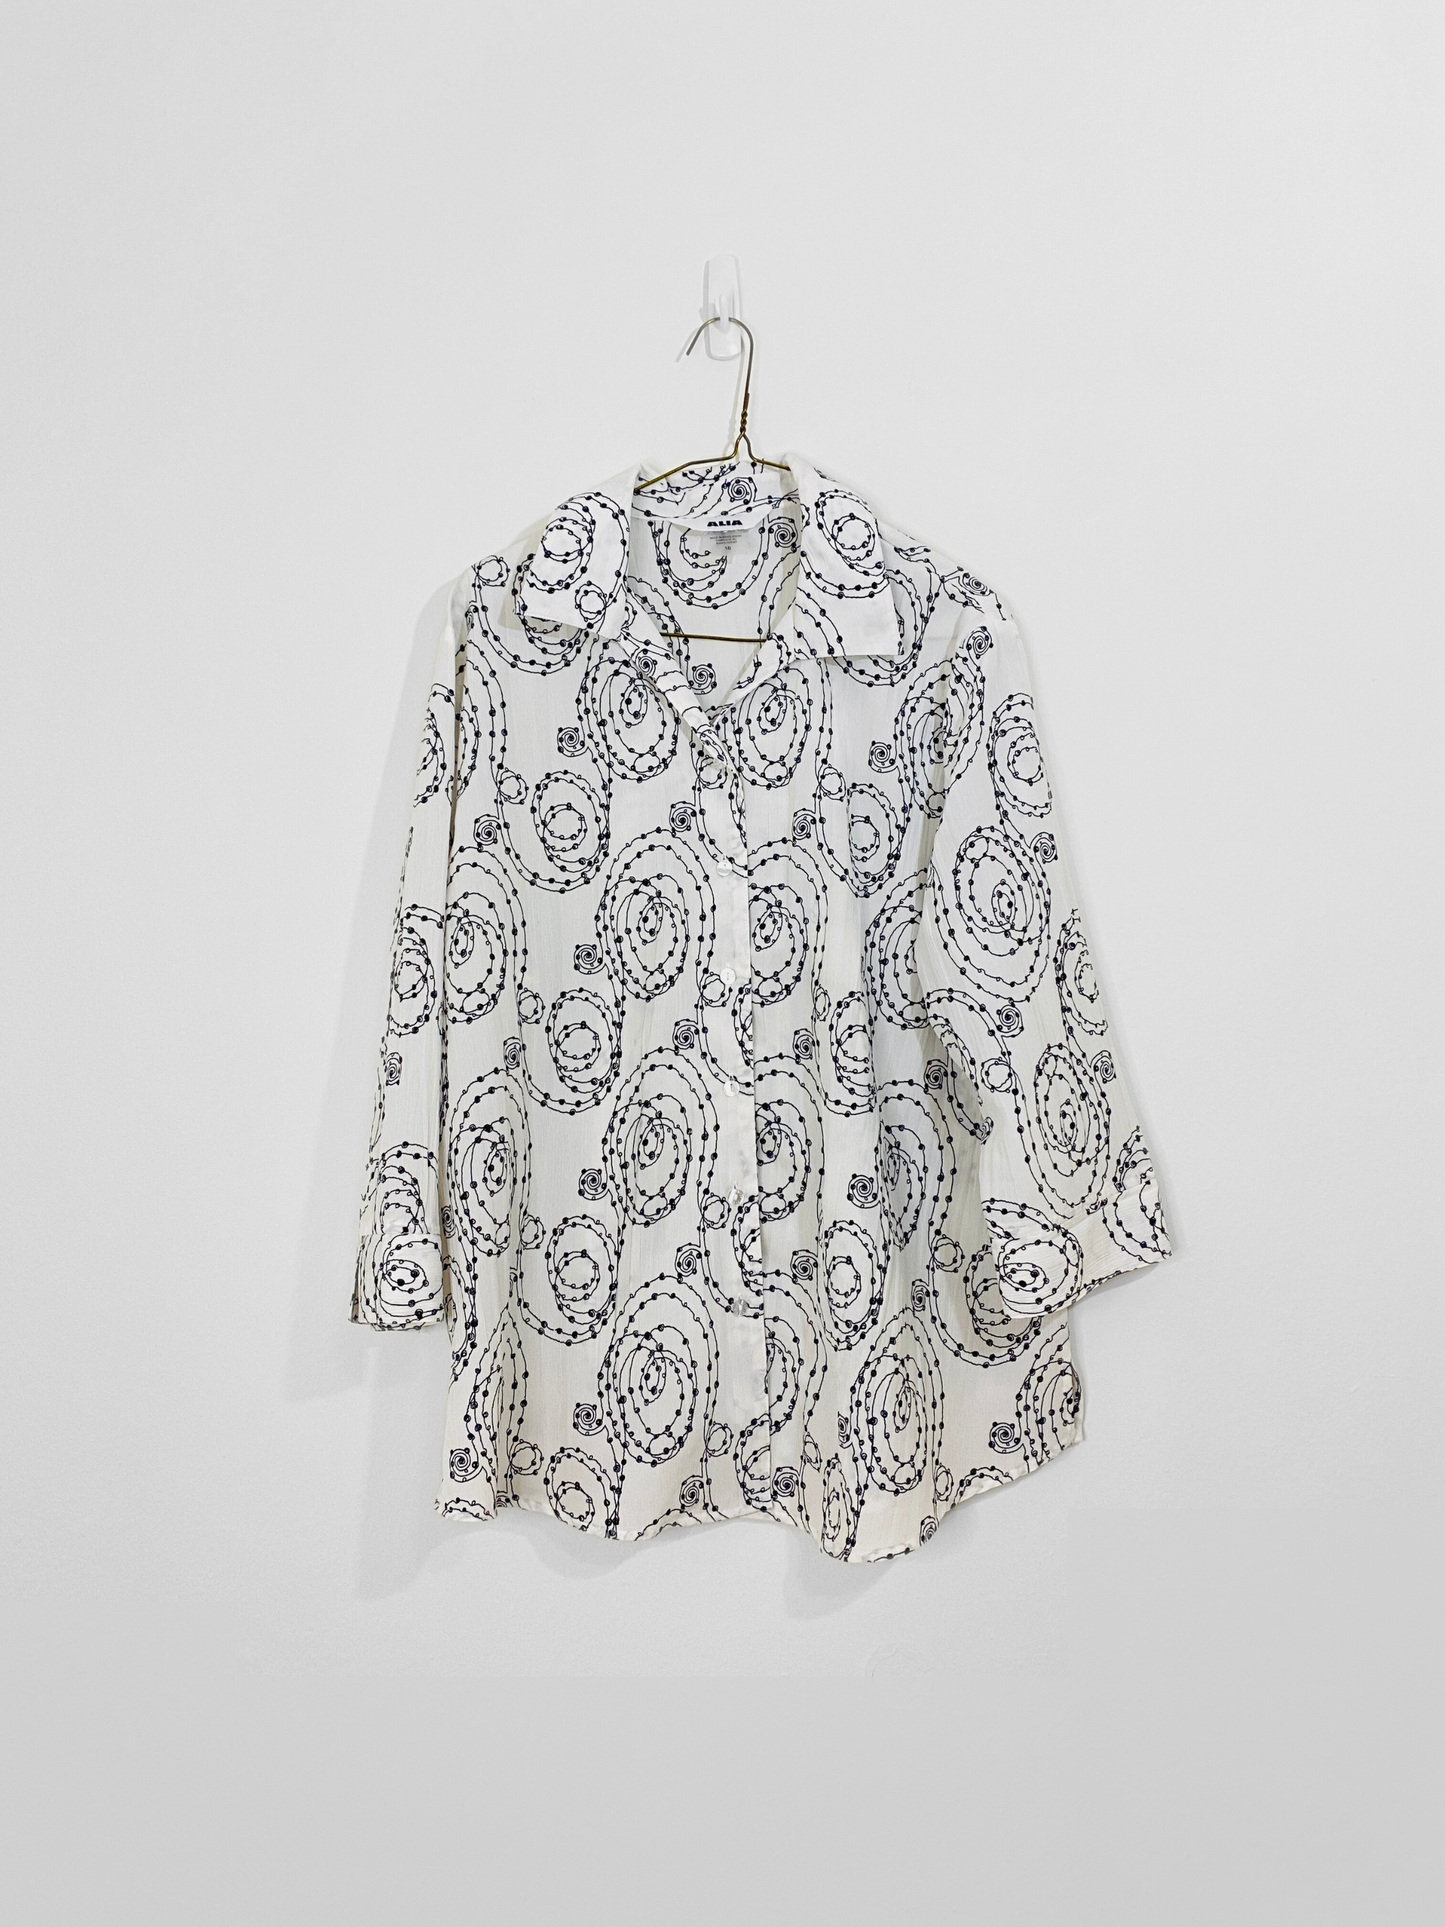 White Patterned Blouse (Size 16)